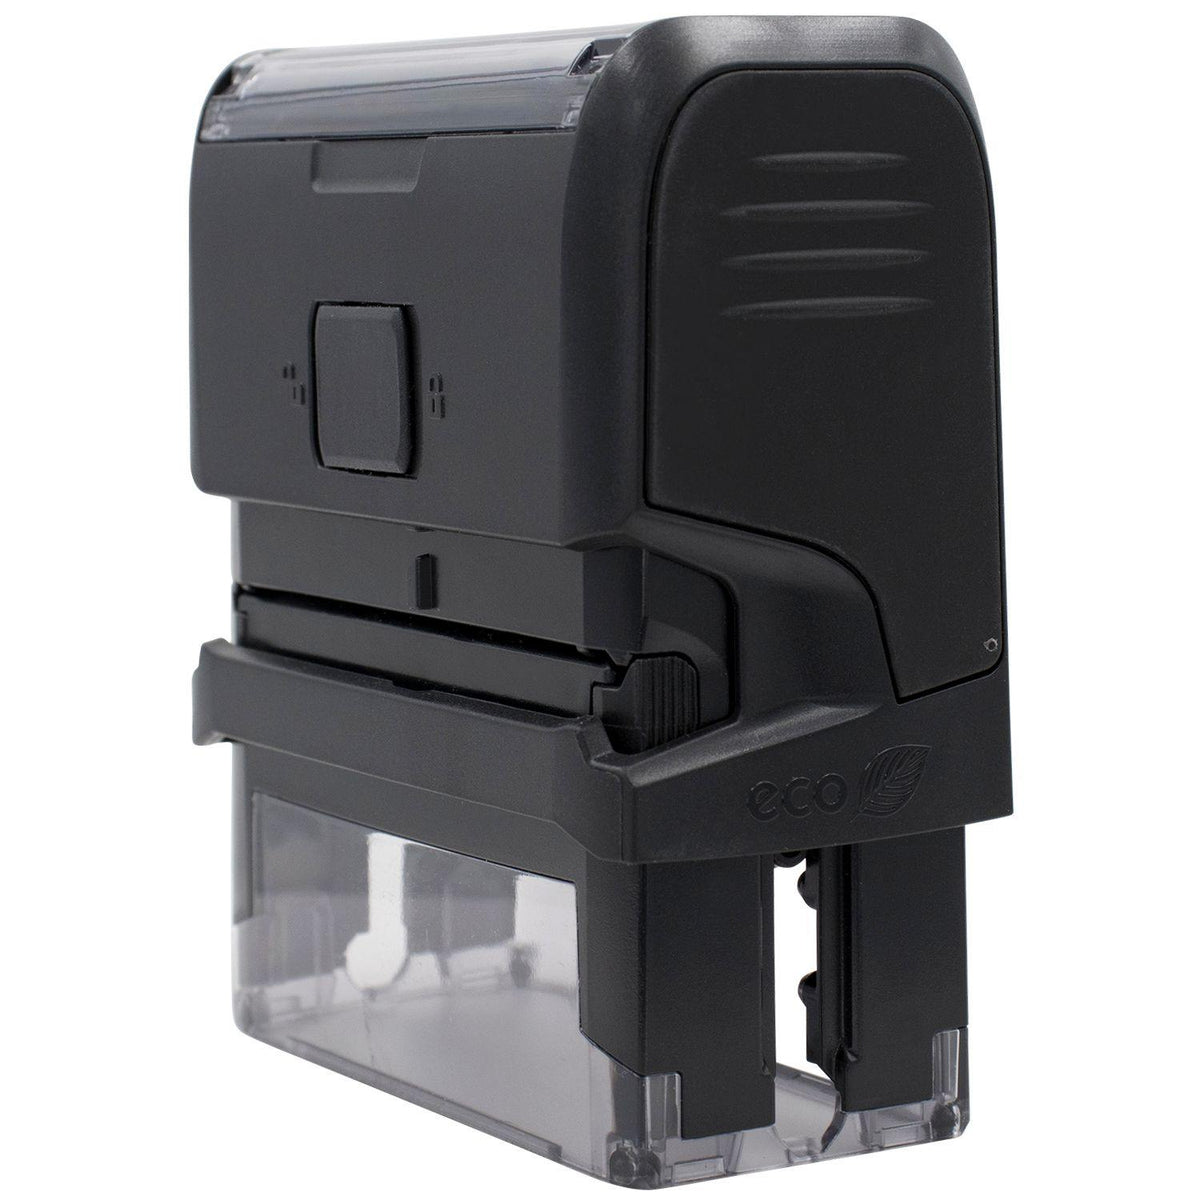 Self Inking Trustee Exhibit Stamp - Engineer Seal Stamps - Brand_Trodat, Impression Size_Small, Stamp Type_Self-Inking Stamp, Type of Use_Legal